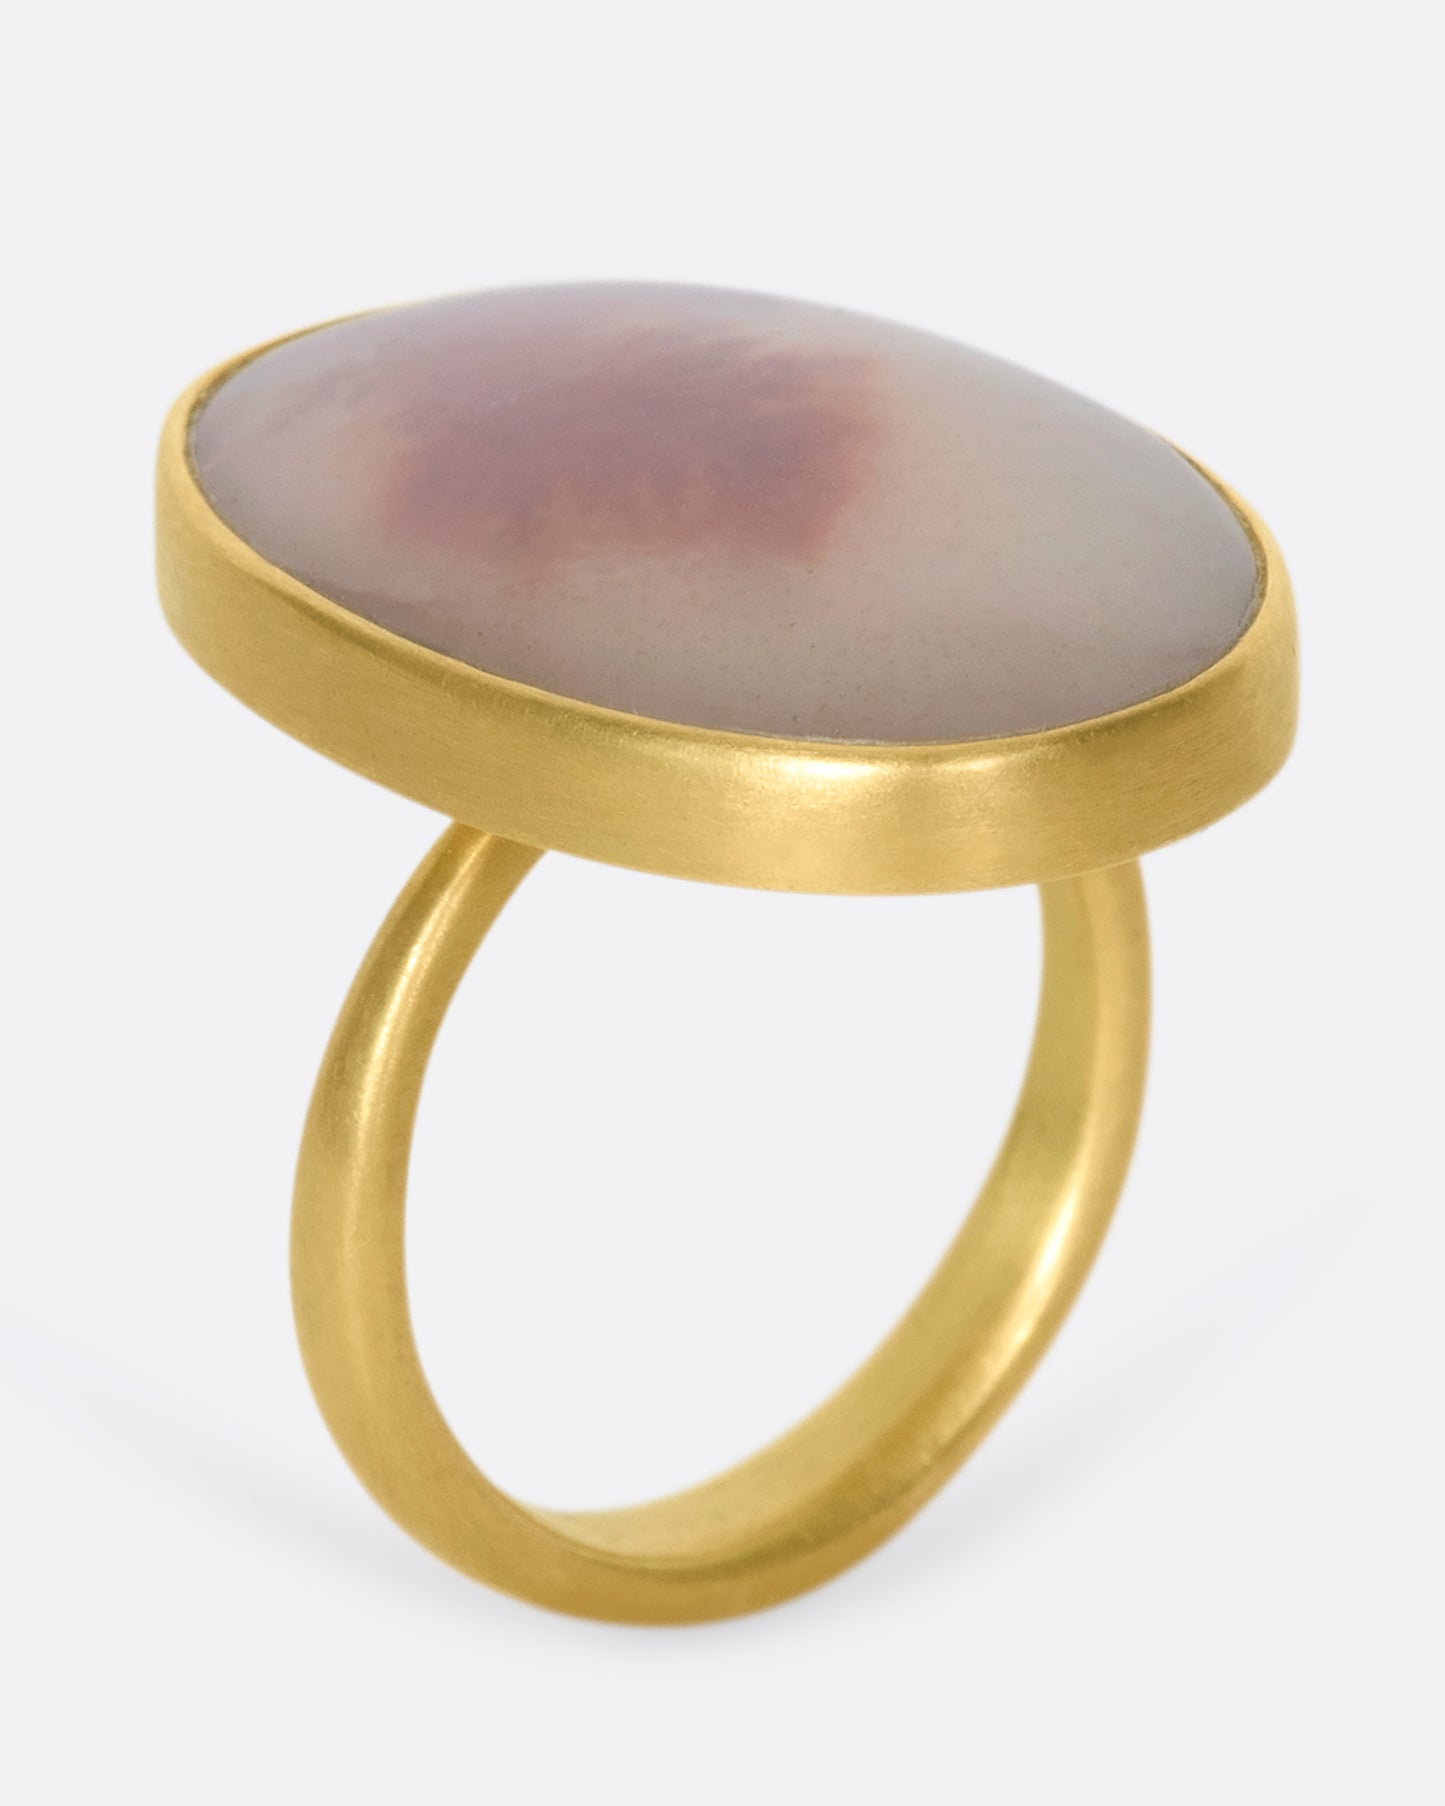 A 14k gold oval dendritic agate quartz ring. The band is perfectly weighted, so the quartz never falls to the side